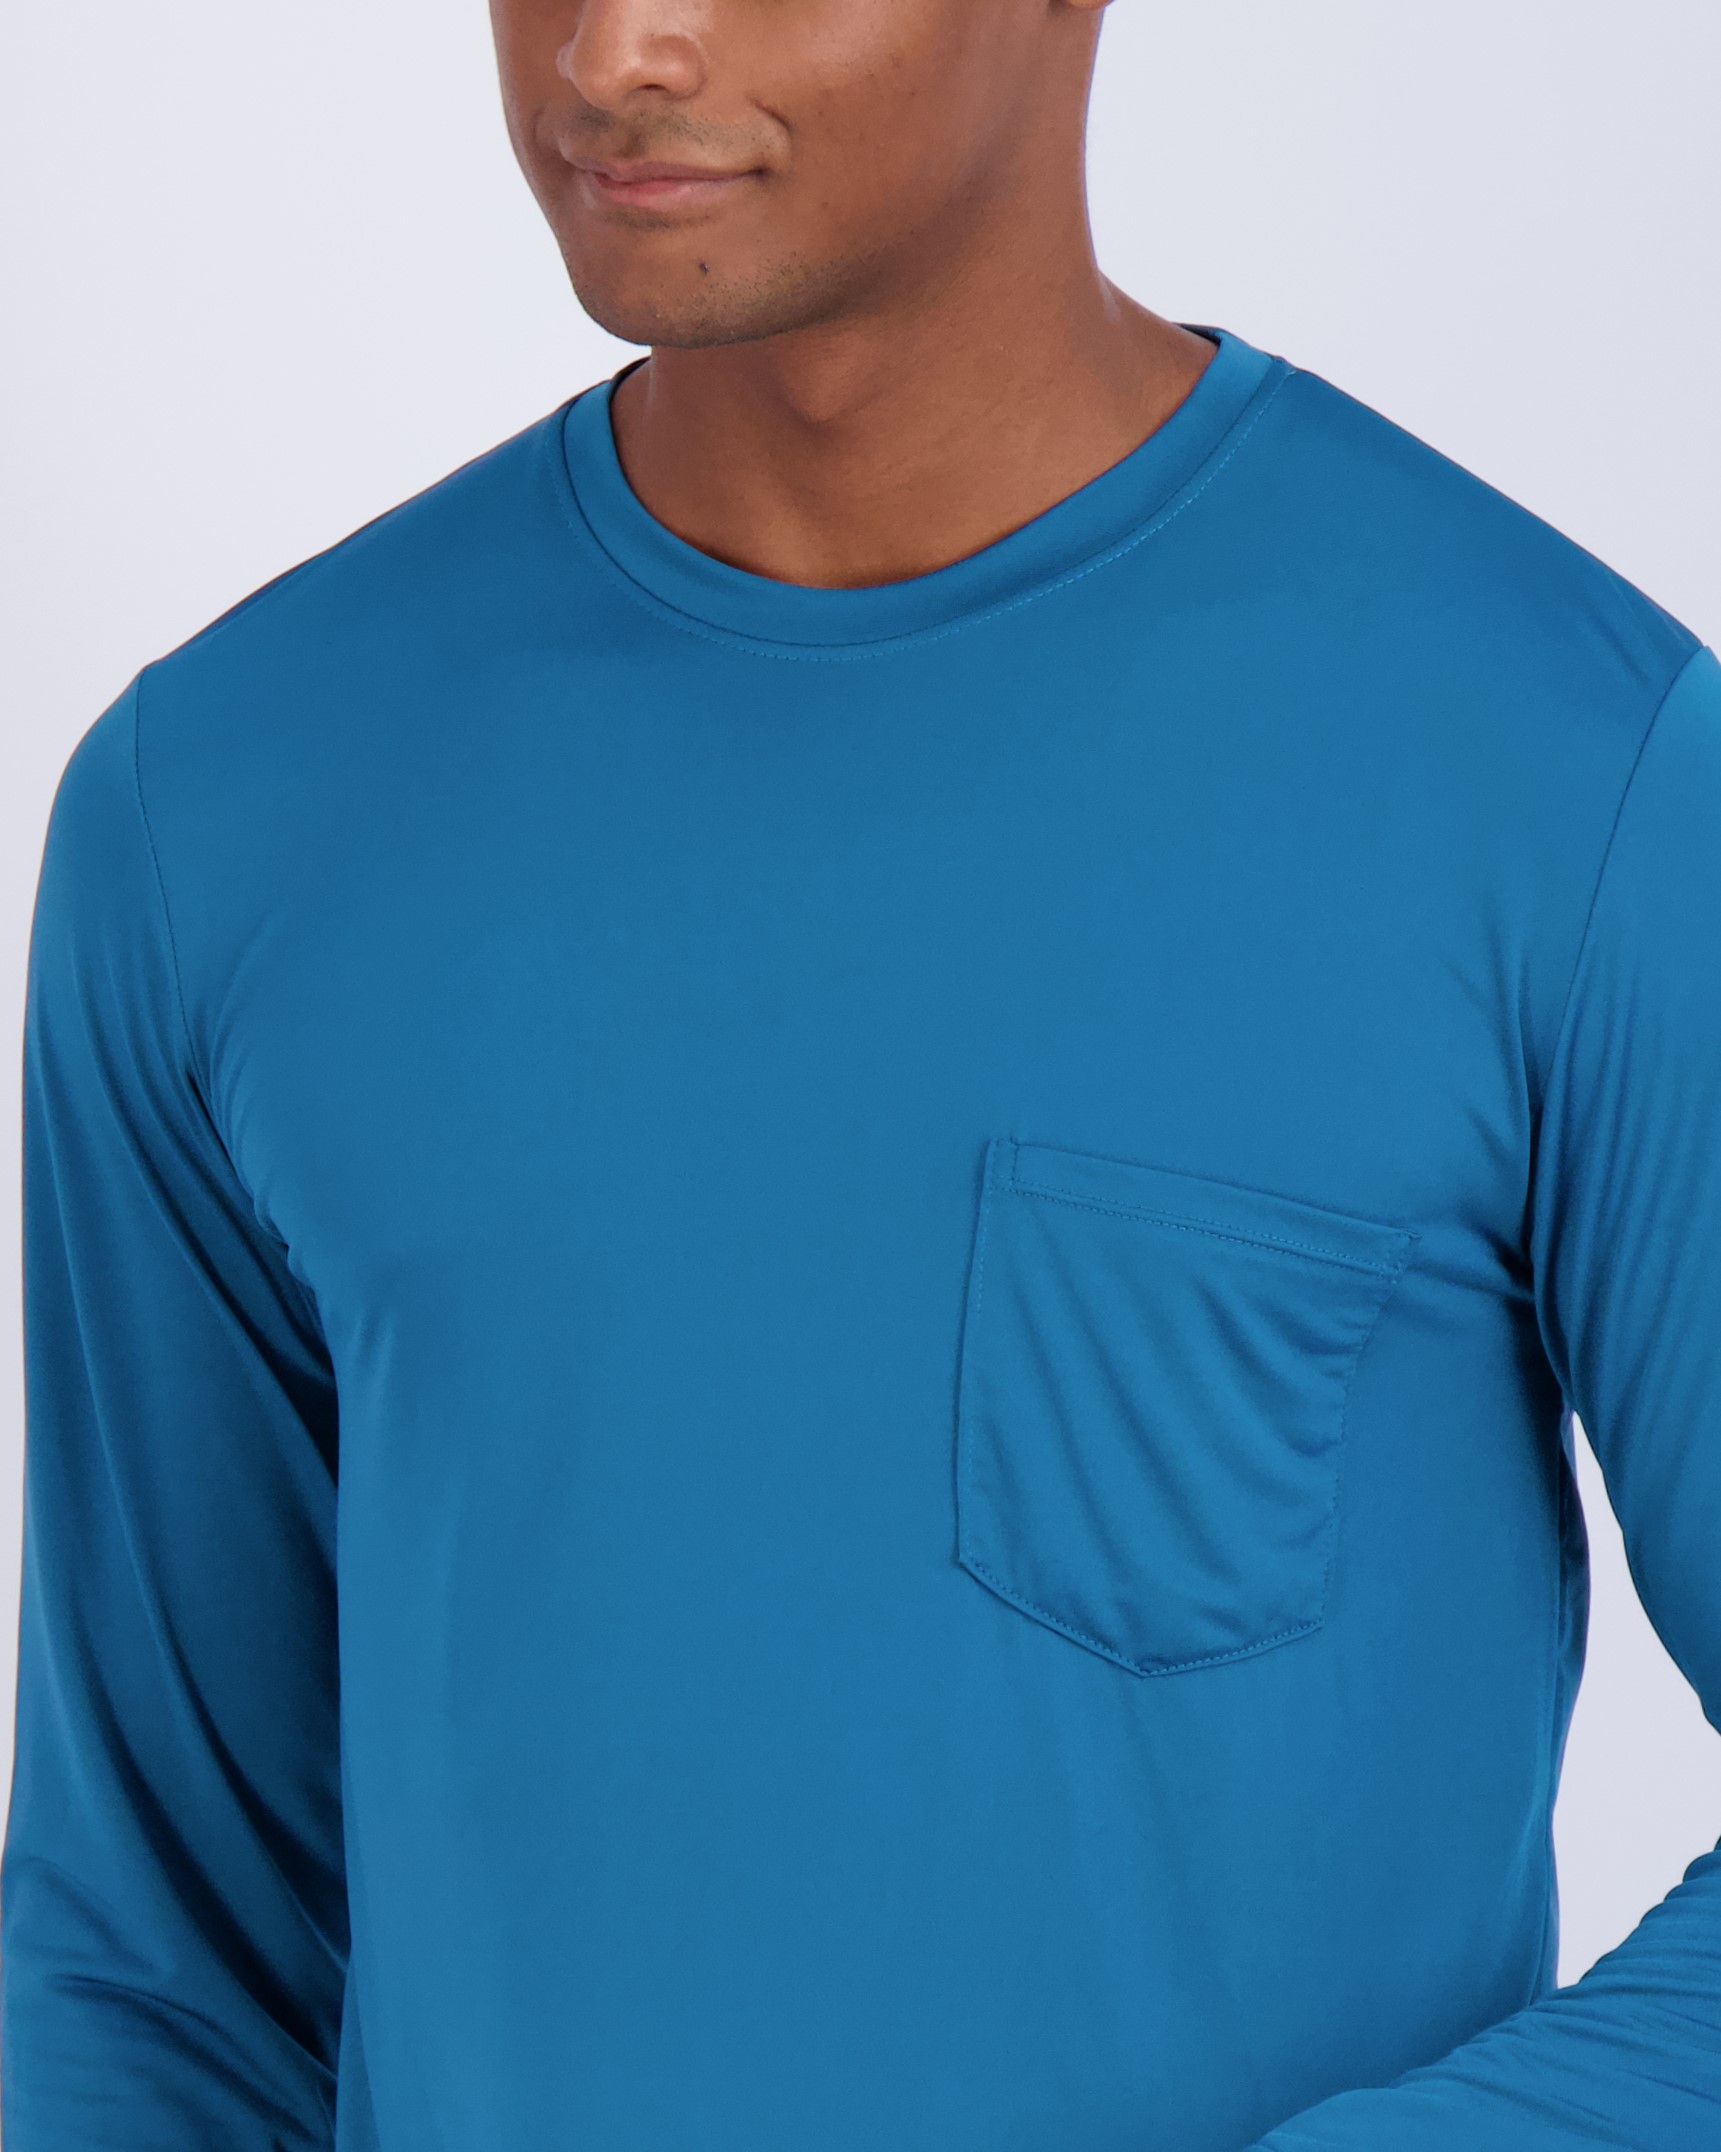 Real Essentials 4 Pack: Men's Dry-Fit Active Athletic Long Sleeve ...